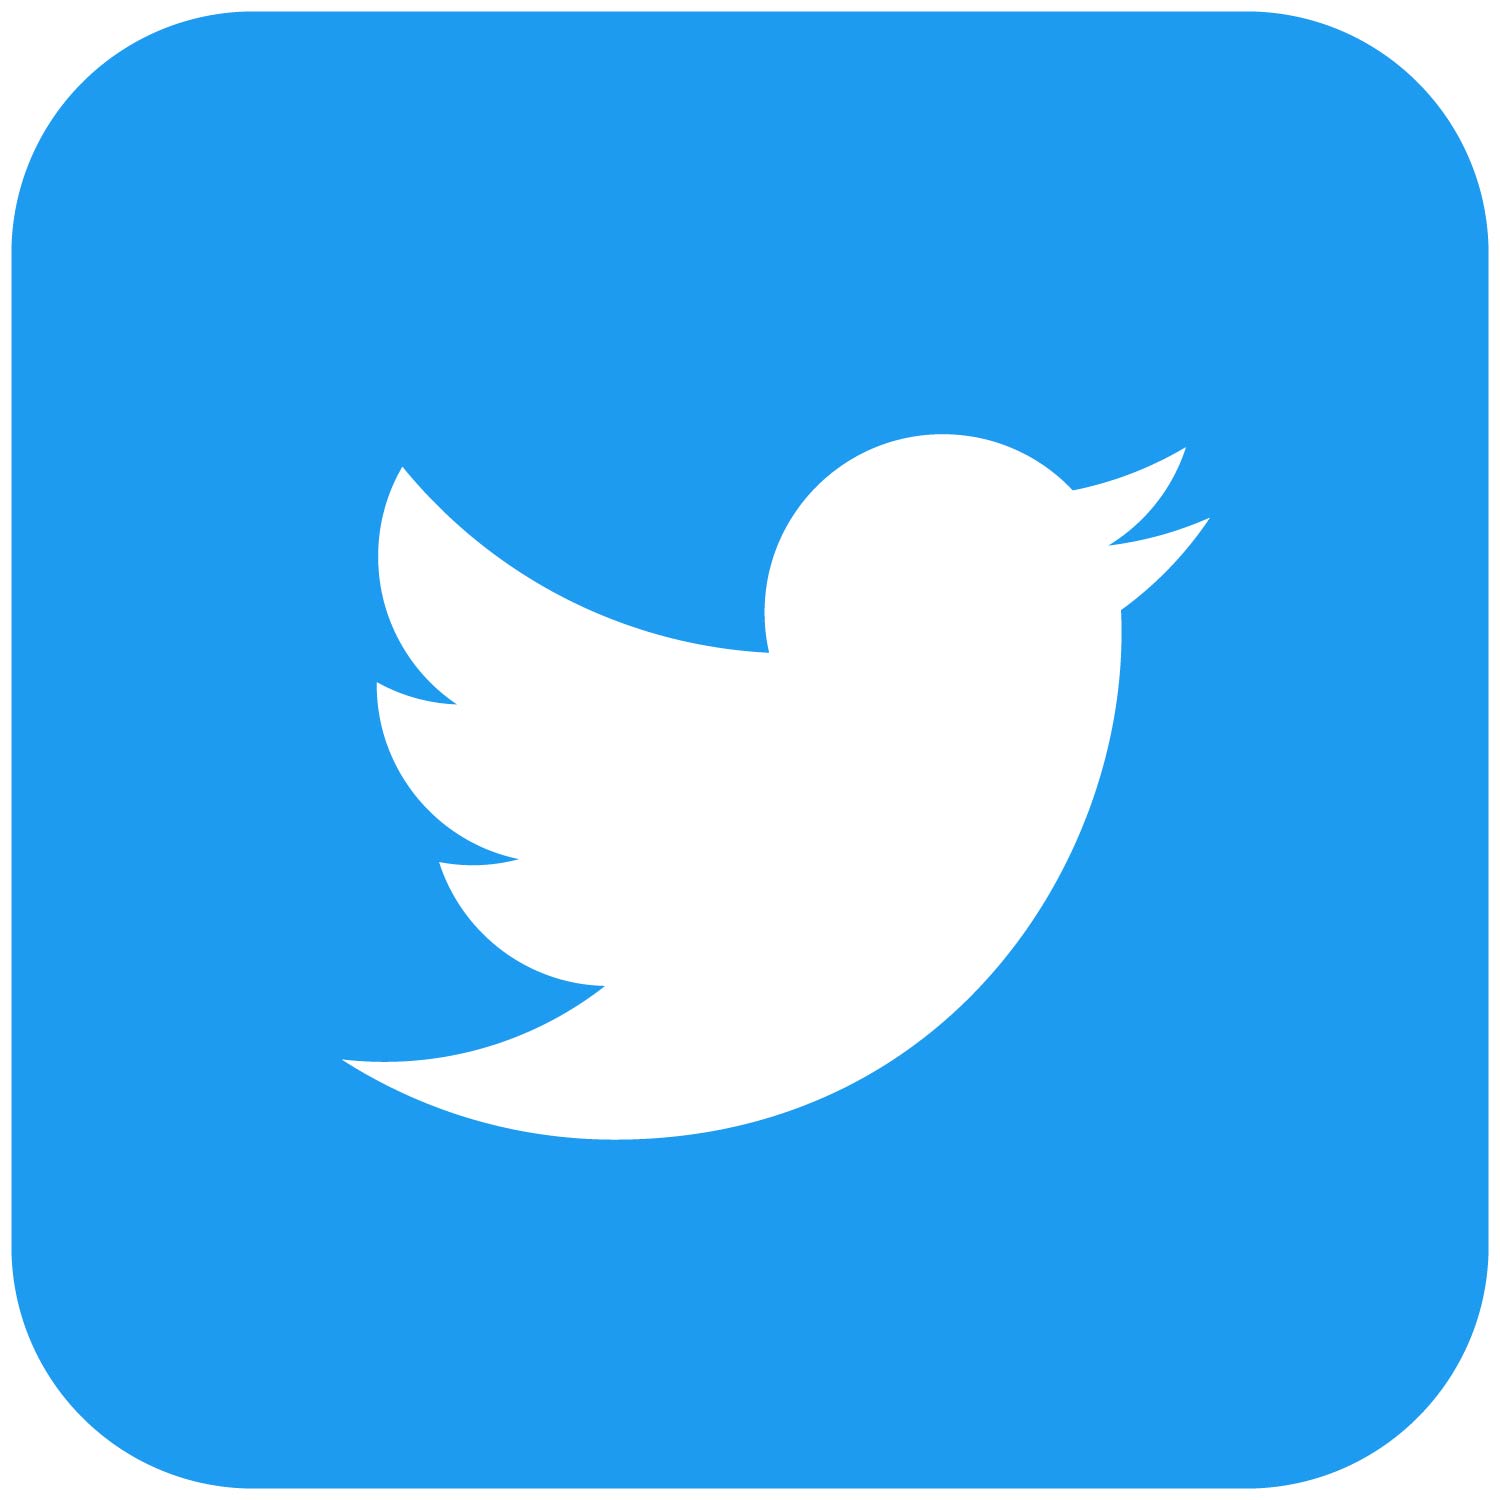 Twitter Rounded Square Icon